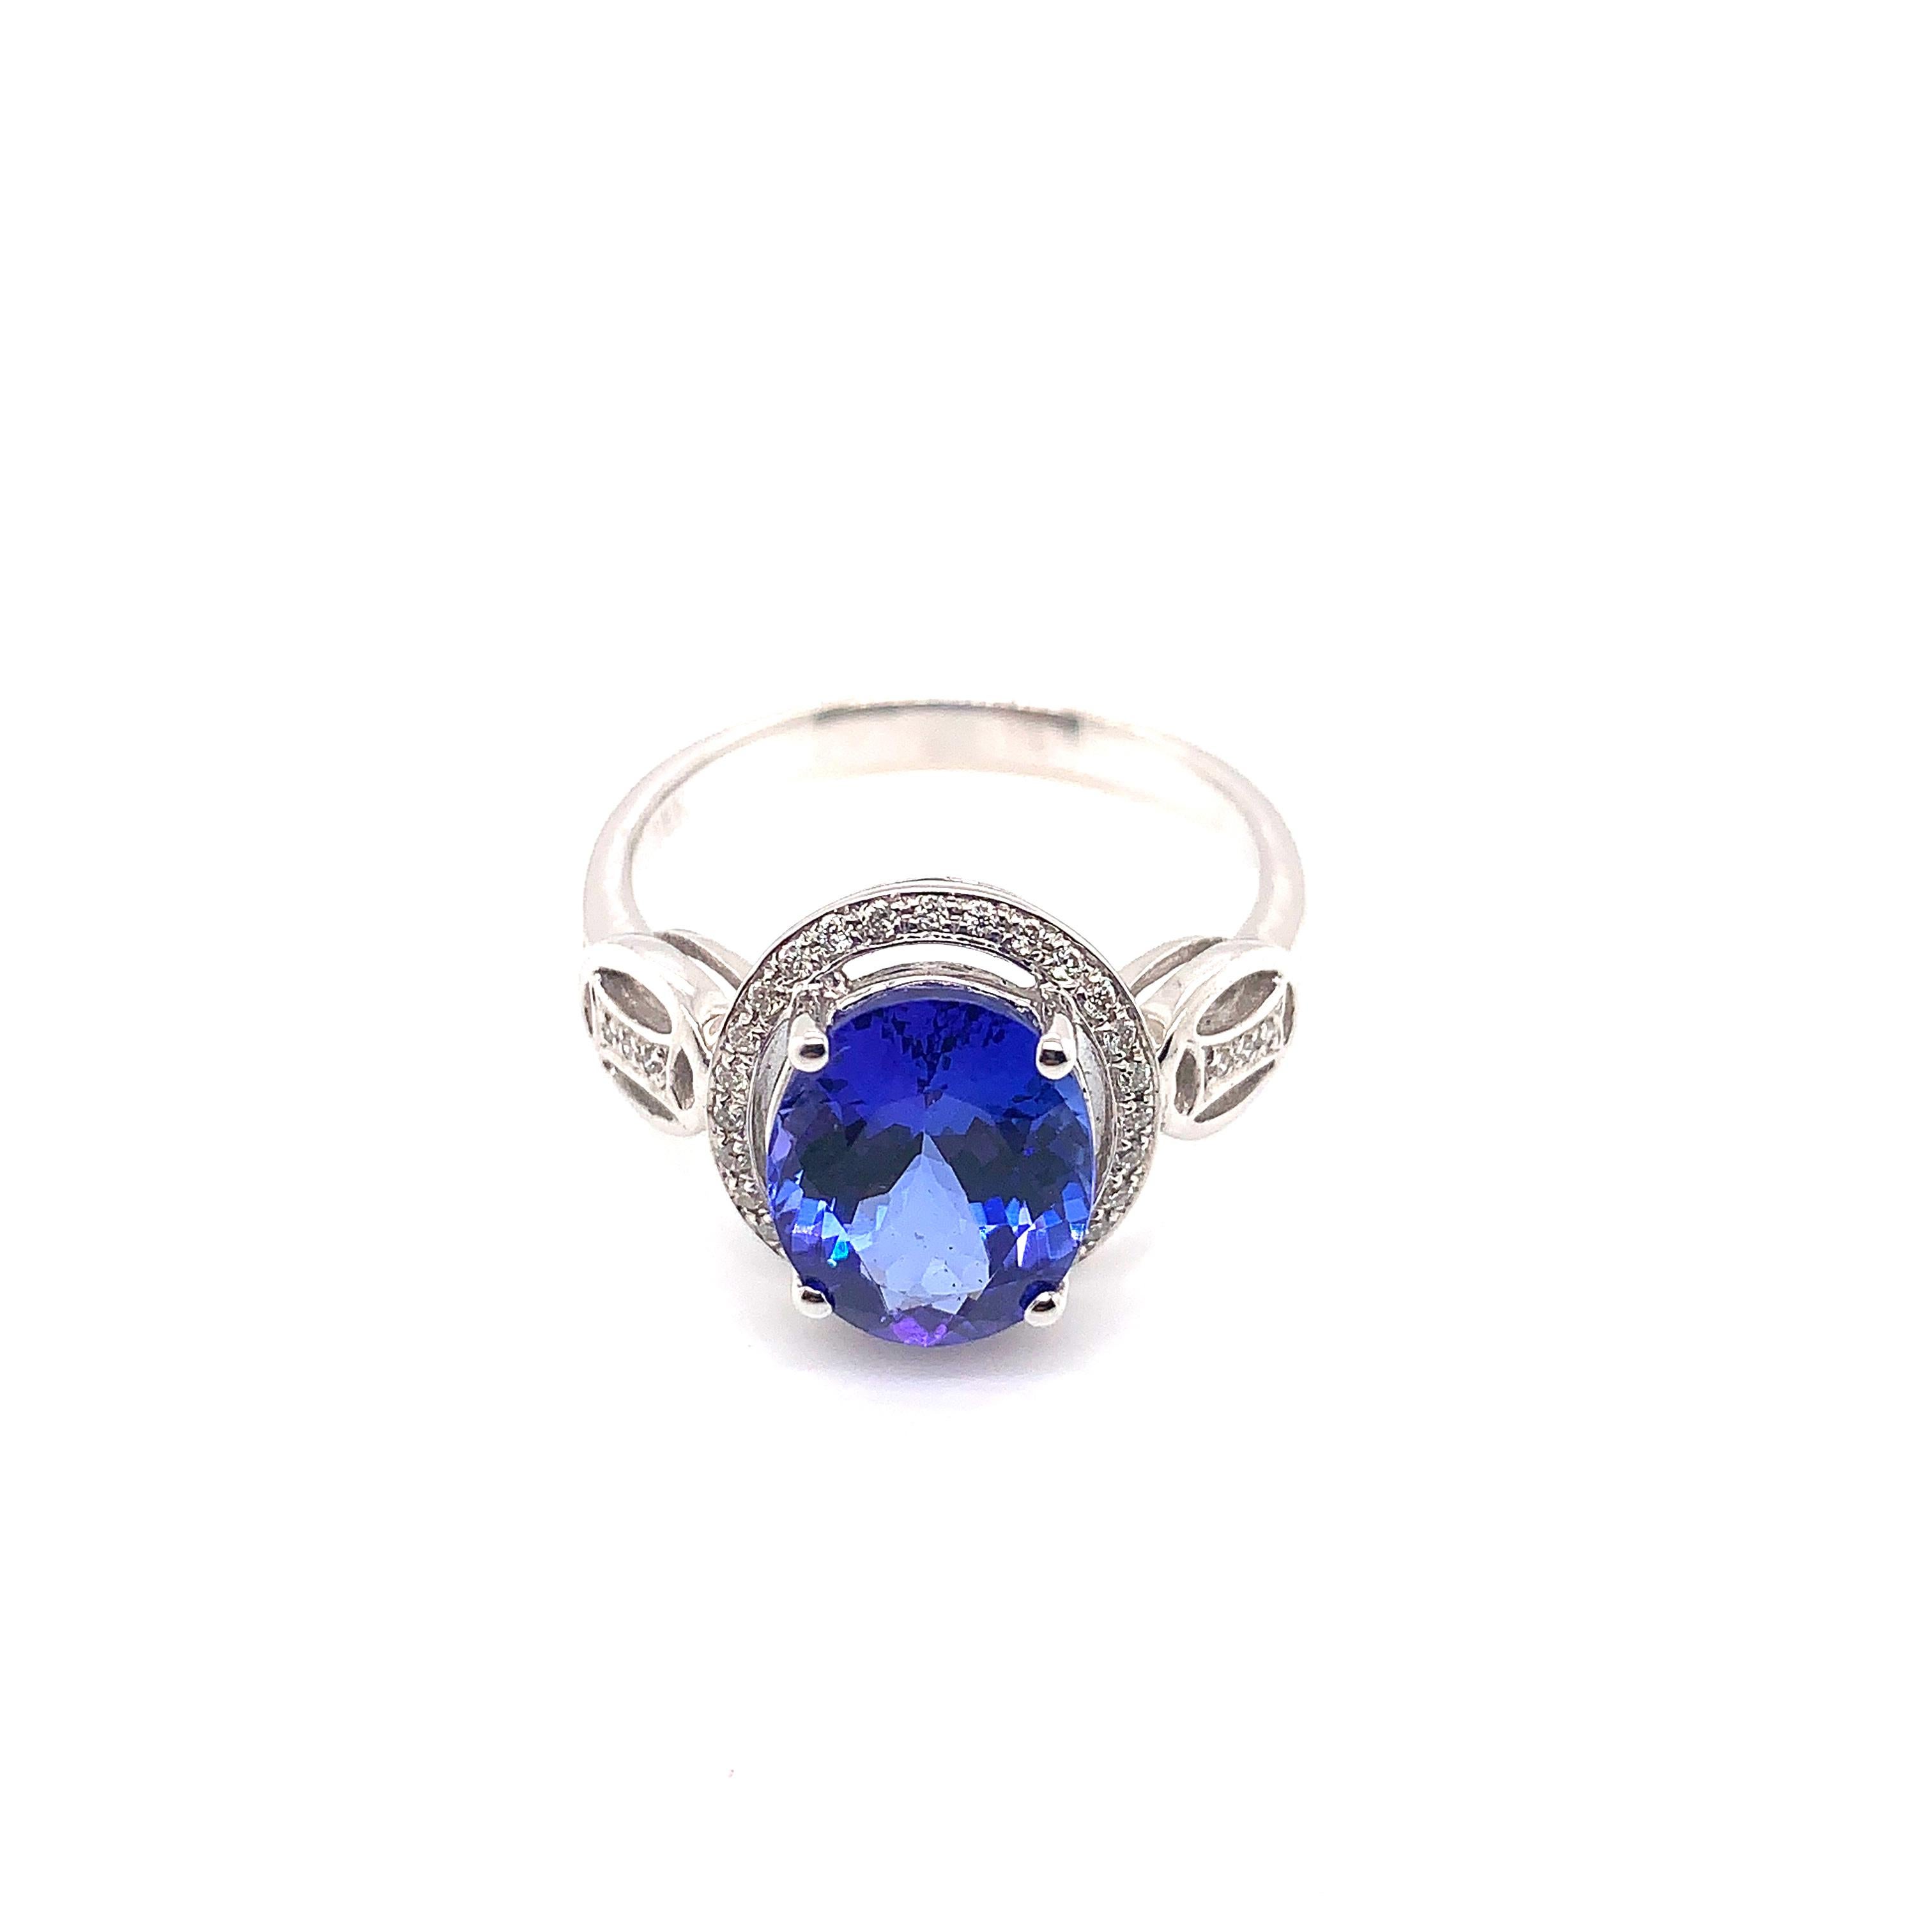 Classic tanzanite ring in 18K white gold with diamonds. 

Tanzanite: 2.790 carat oval shape.
Diamonds: 0.134 carat, G colour, VS clarity. 
Gold: 4.07g, 18K white gold. 